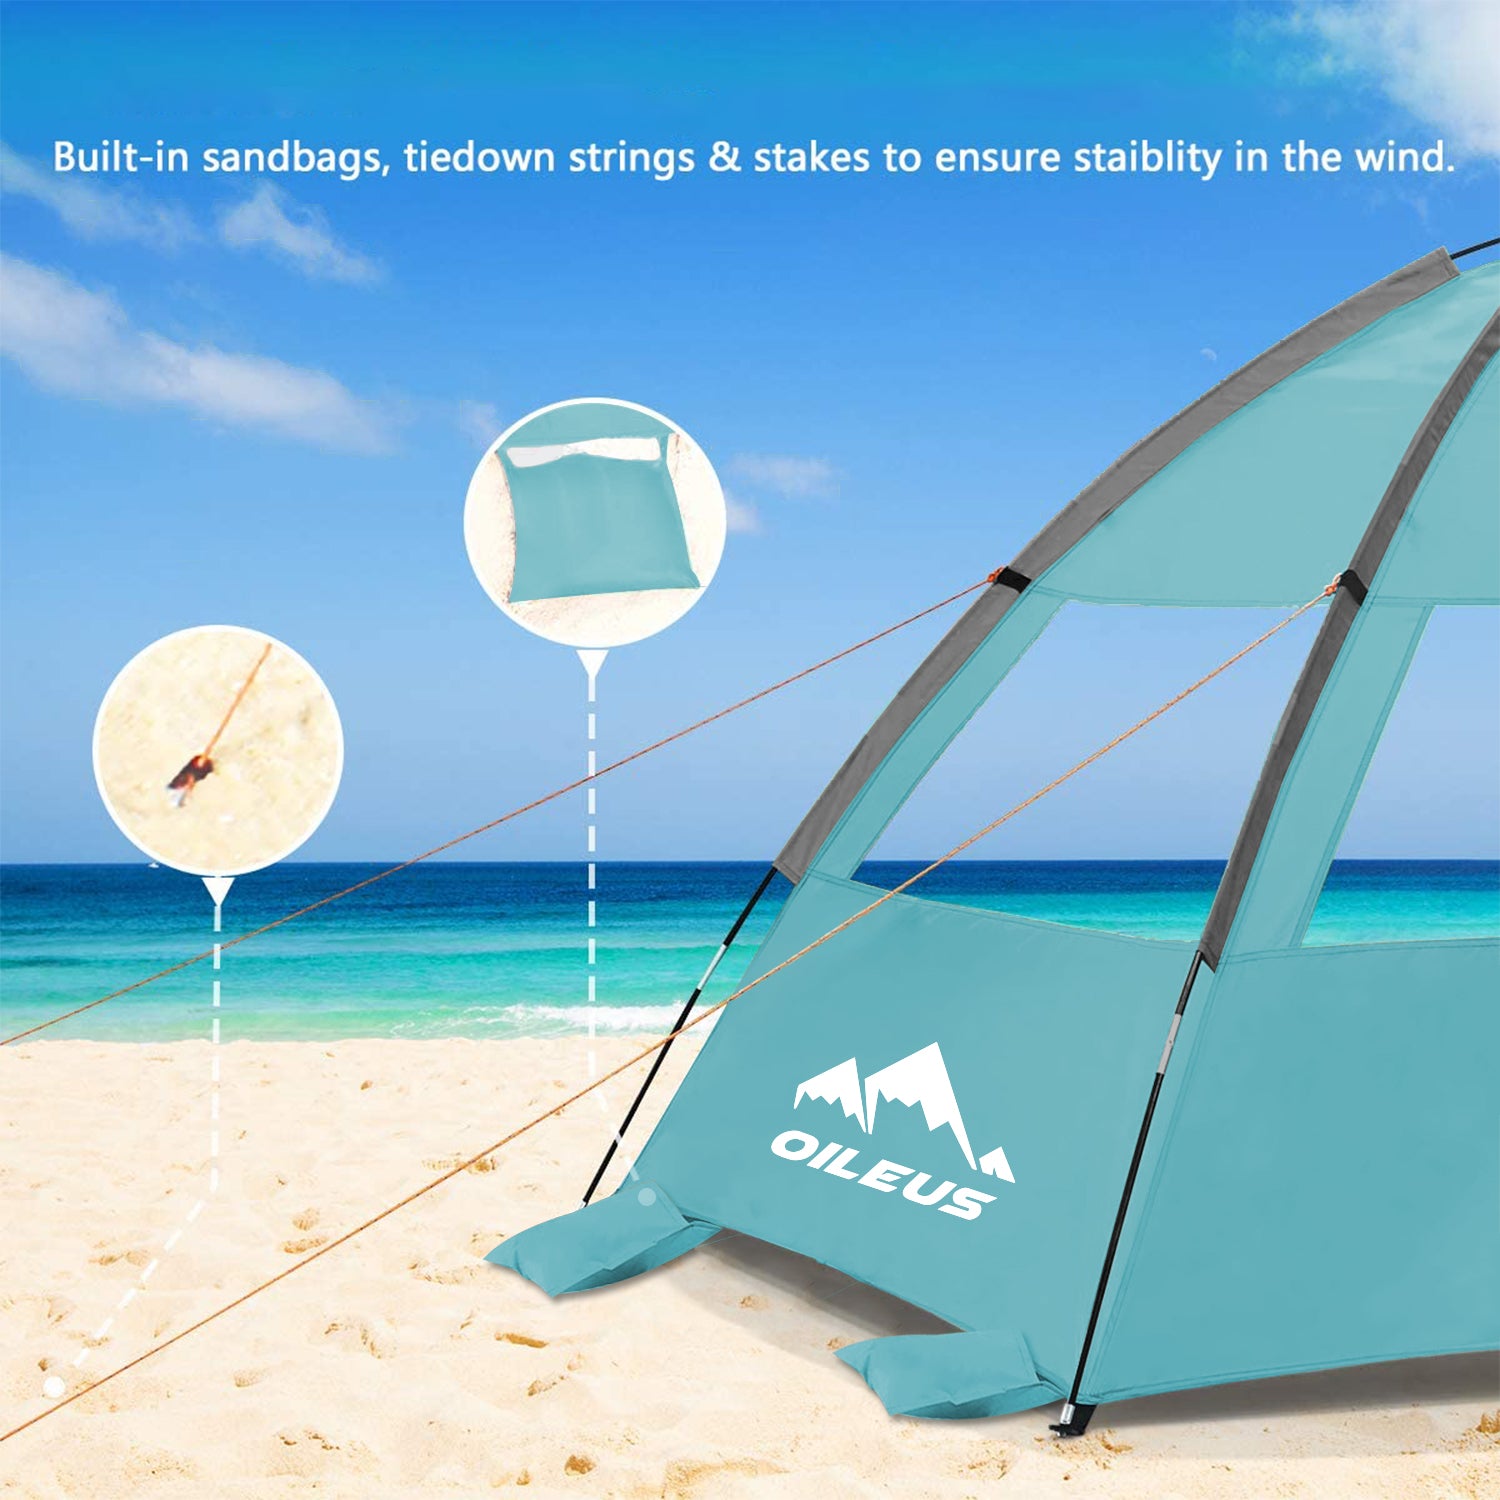 Oileus Beach Tent 2-3 Person Portable Sun Shade Shelter UV Protection， Extended Floor Ventilating Mesh Roll Up Windows Carrying Bag Stakes 6 Sand Pockets Fishing Hiking Camping， Sky Blue